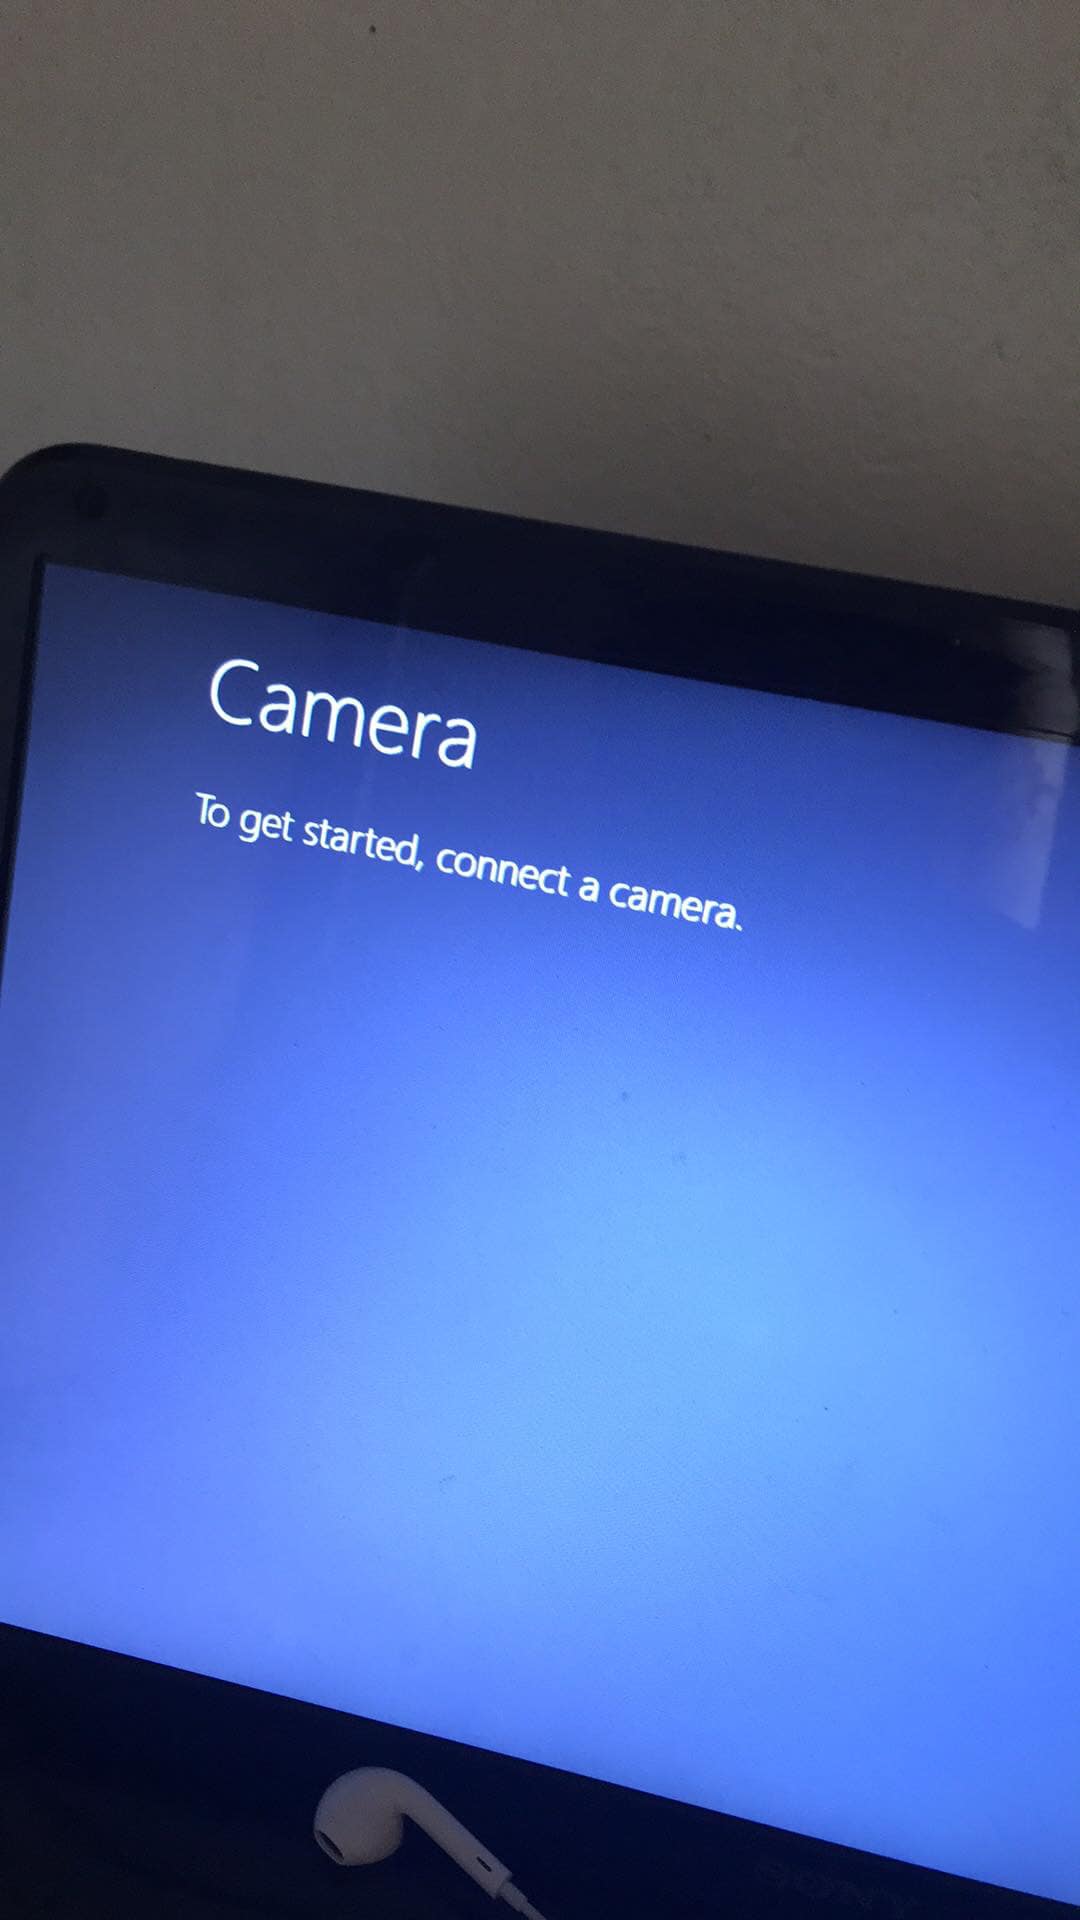 Fix “To get started, connect a camera” error on win 8